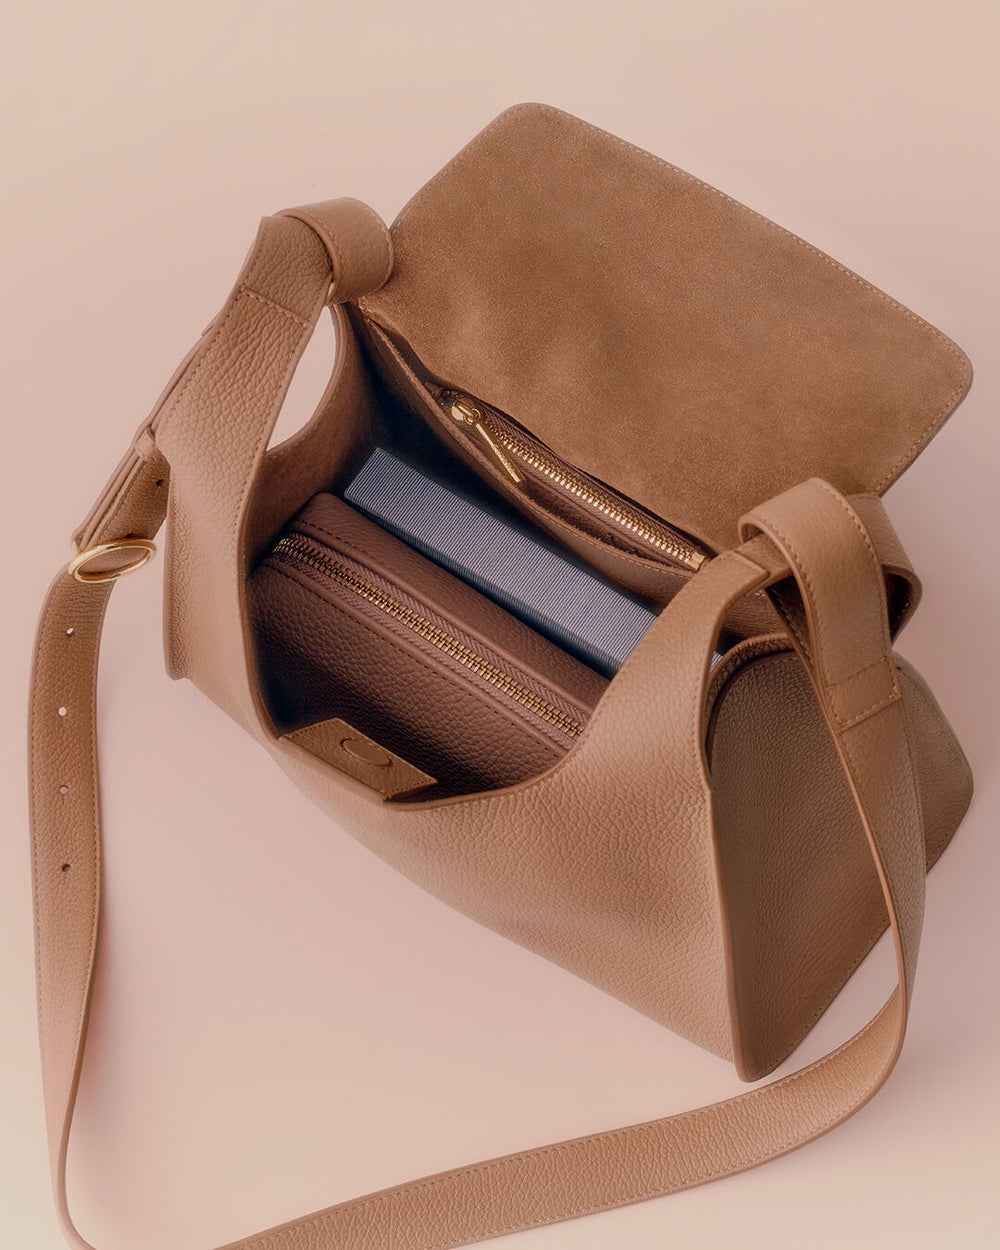 Open handbag with books and a wallet inside.